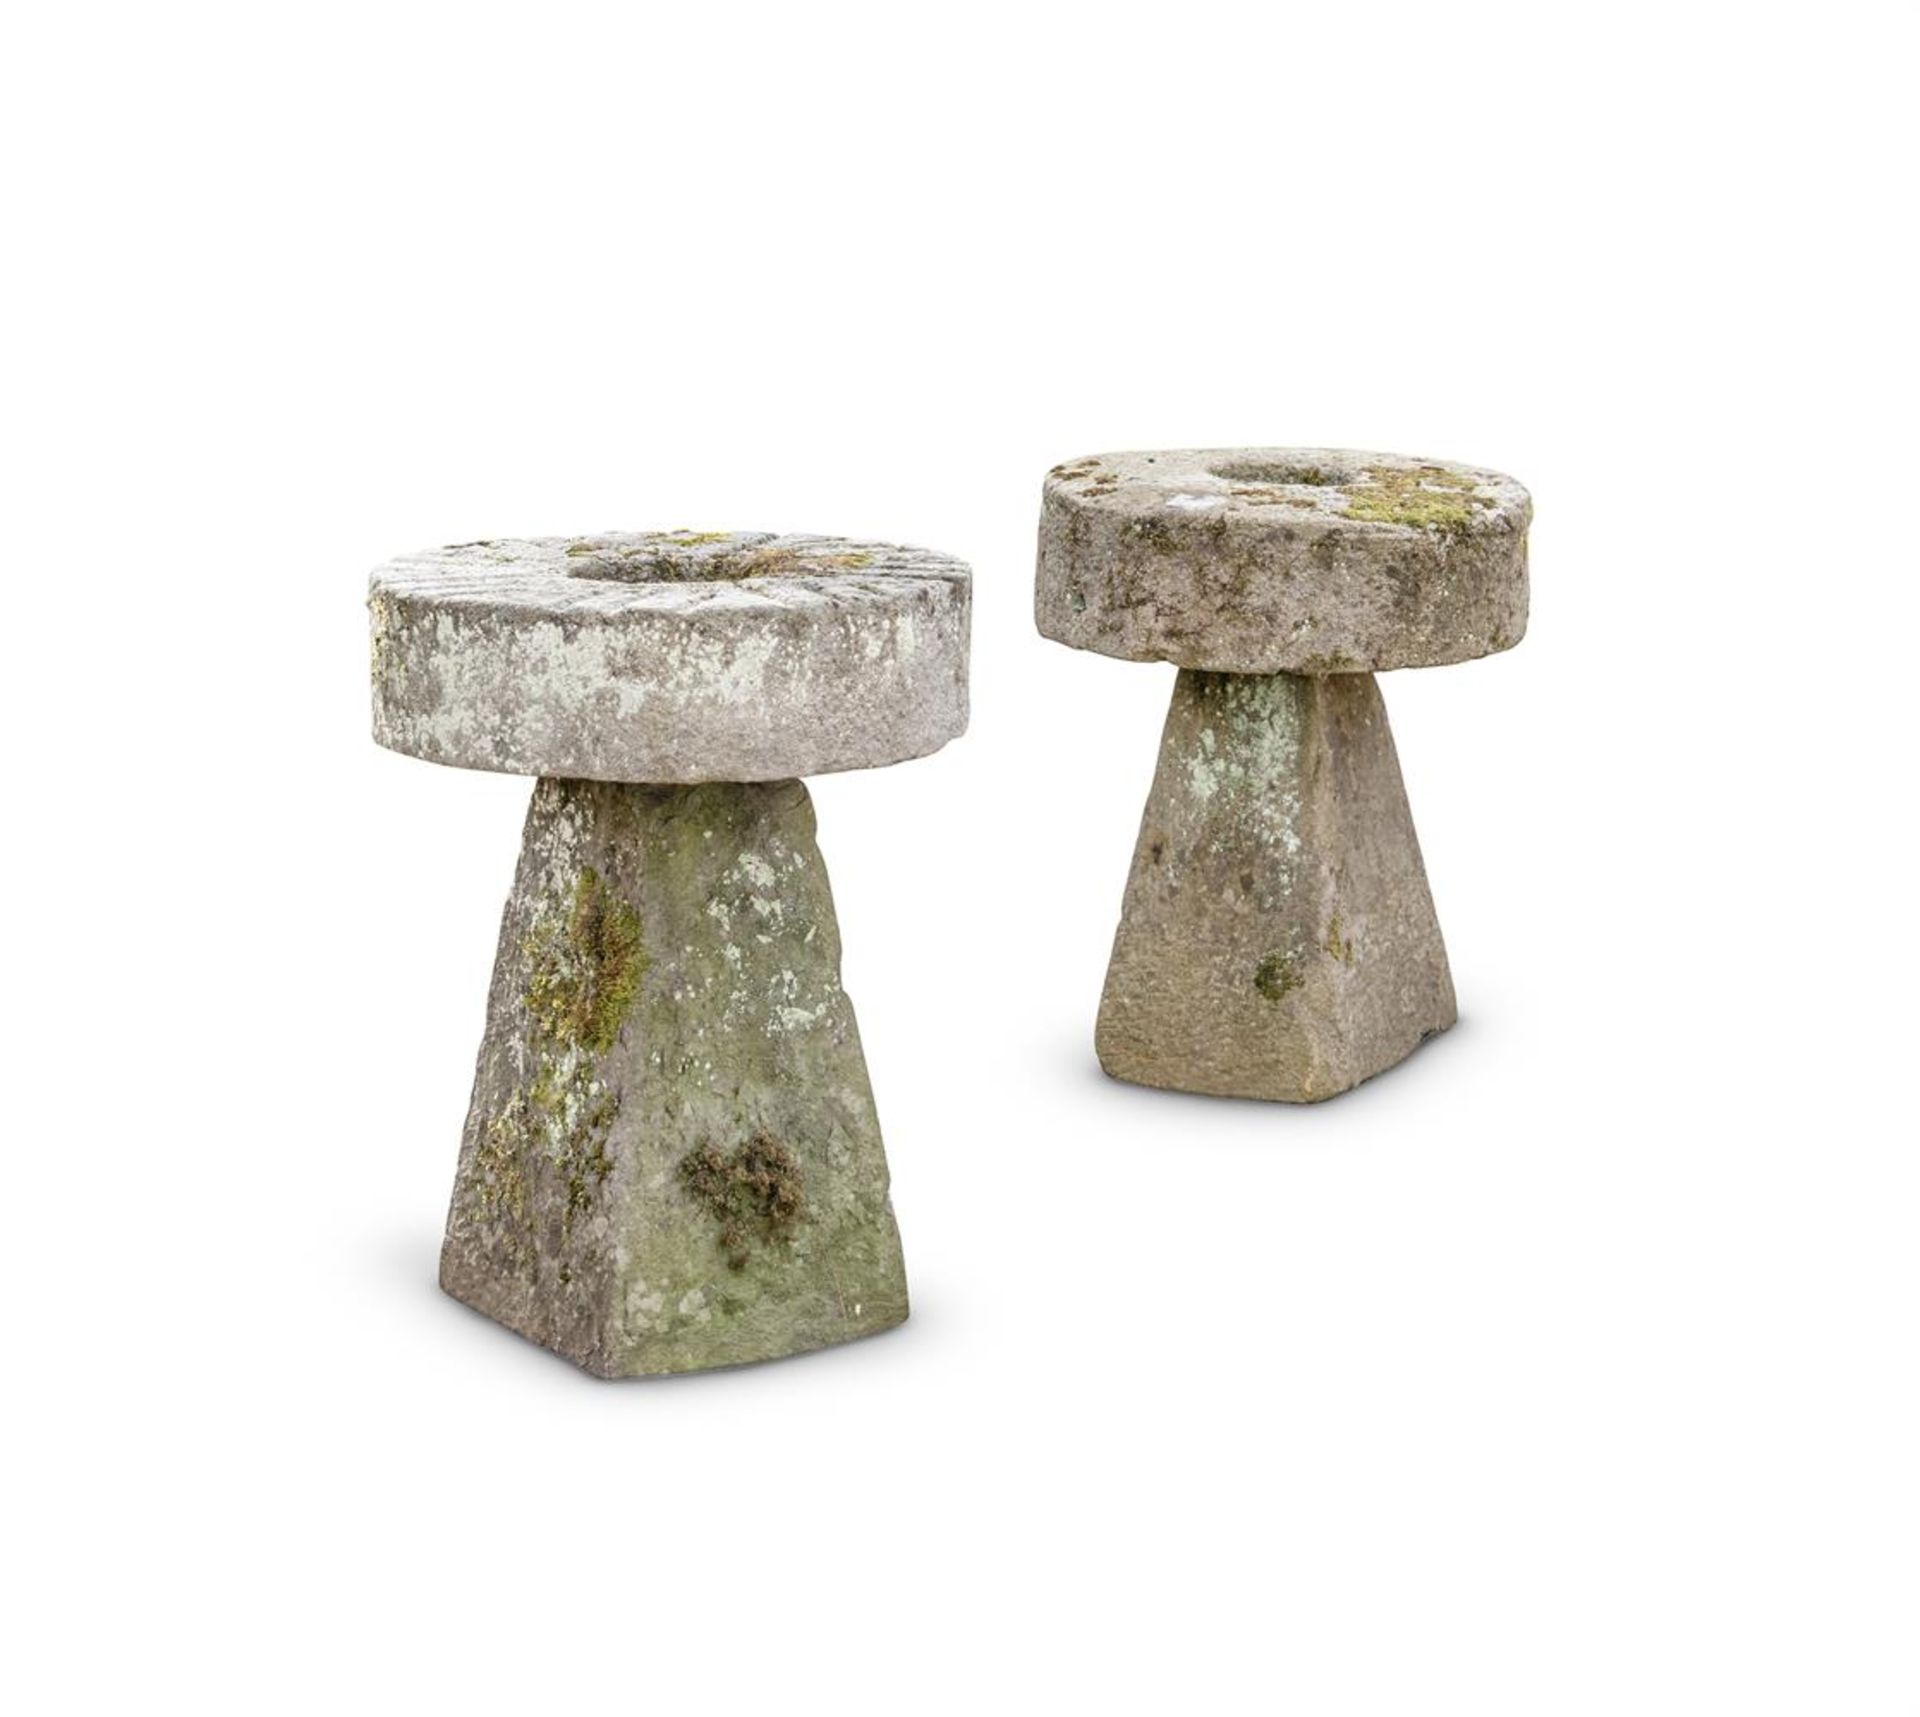 A PAIR OF HEAVY MILL WHEEL TOPPED STADDLE STONE TABLES, LATE 18TH/EARLY 19TH CENTURY - Image 3 of 3